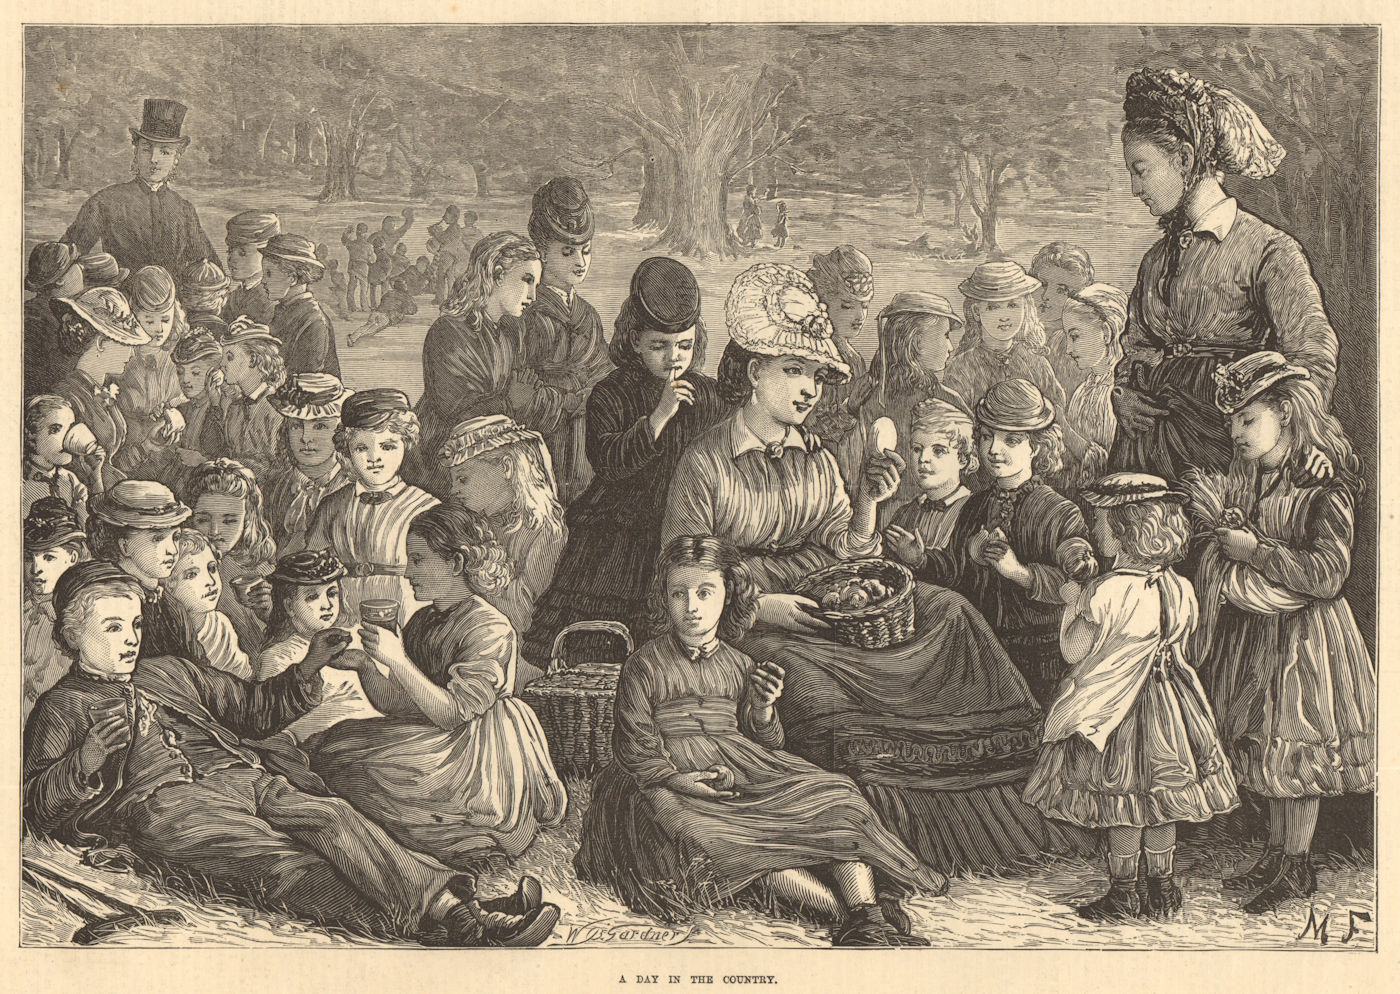 Associate Product A day in the country. Society. Children 1872 antique ILN full page print